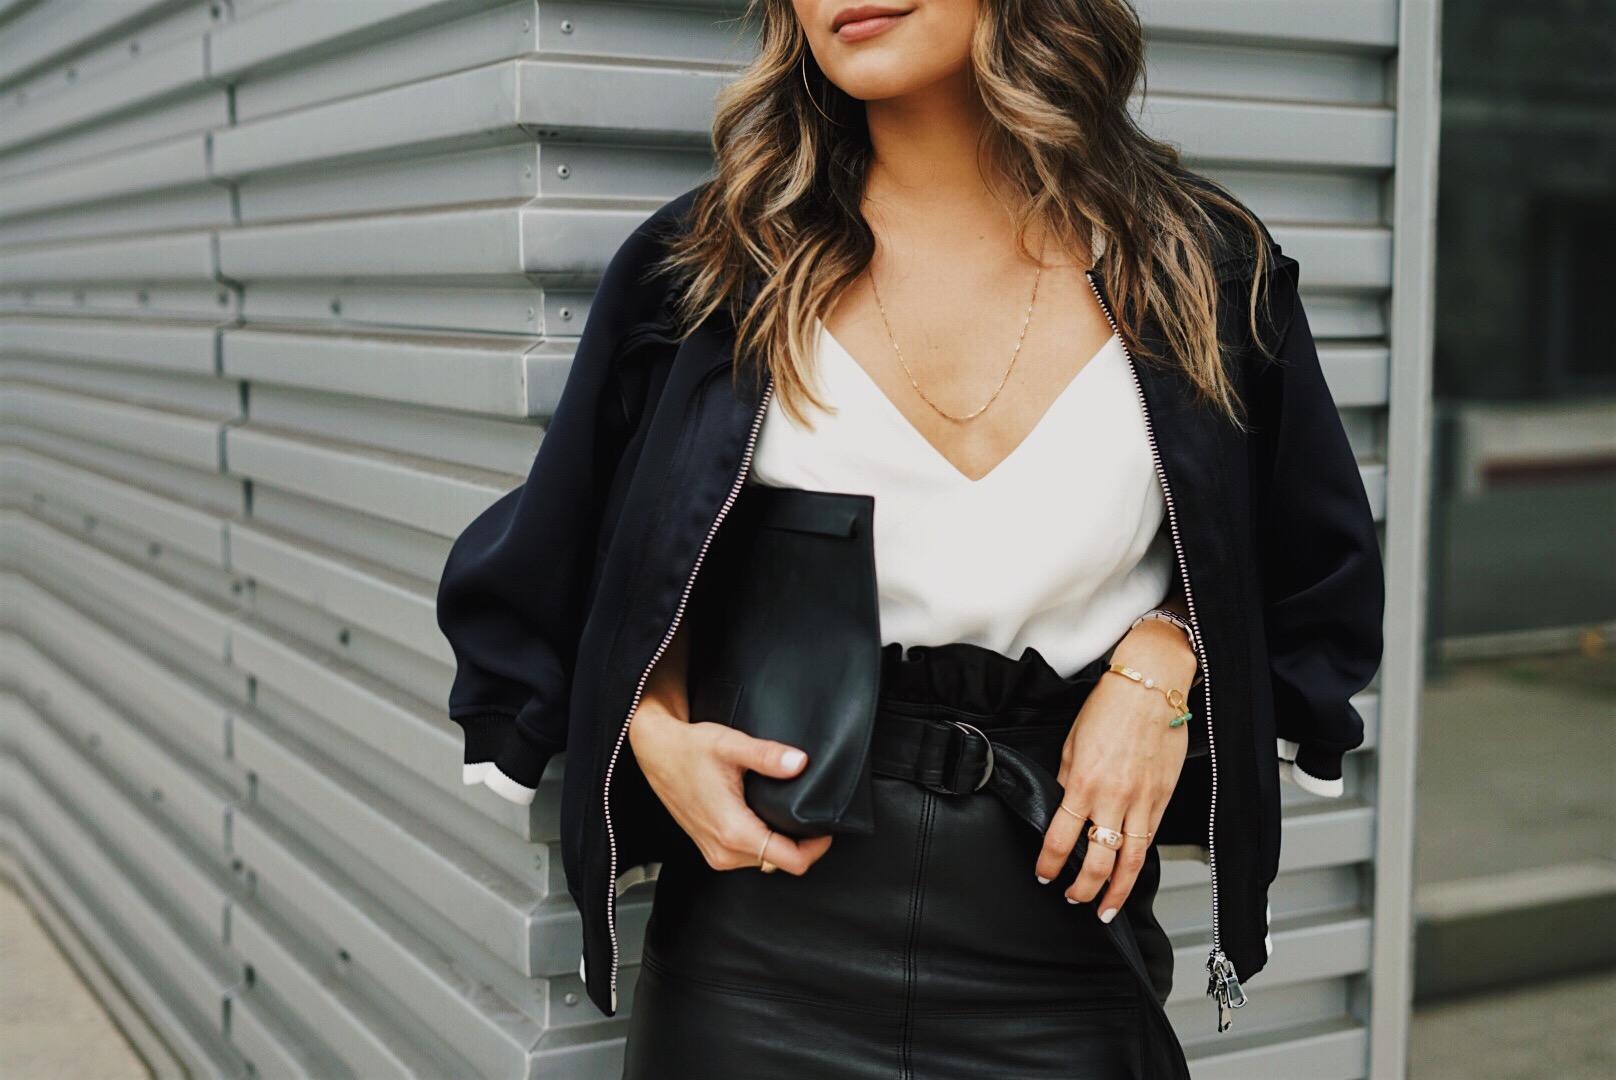 Pam Hetlinger styles a leather skirt with a bomber jacket